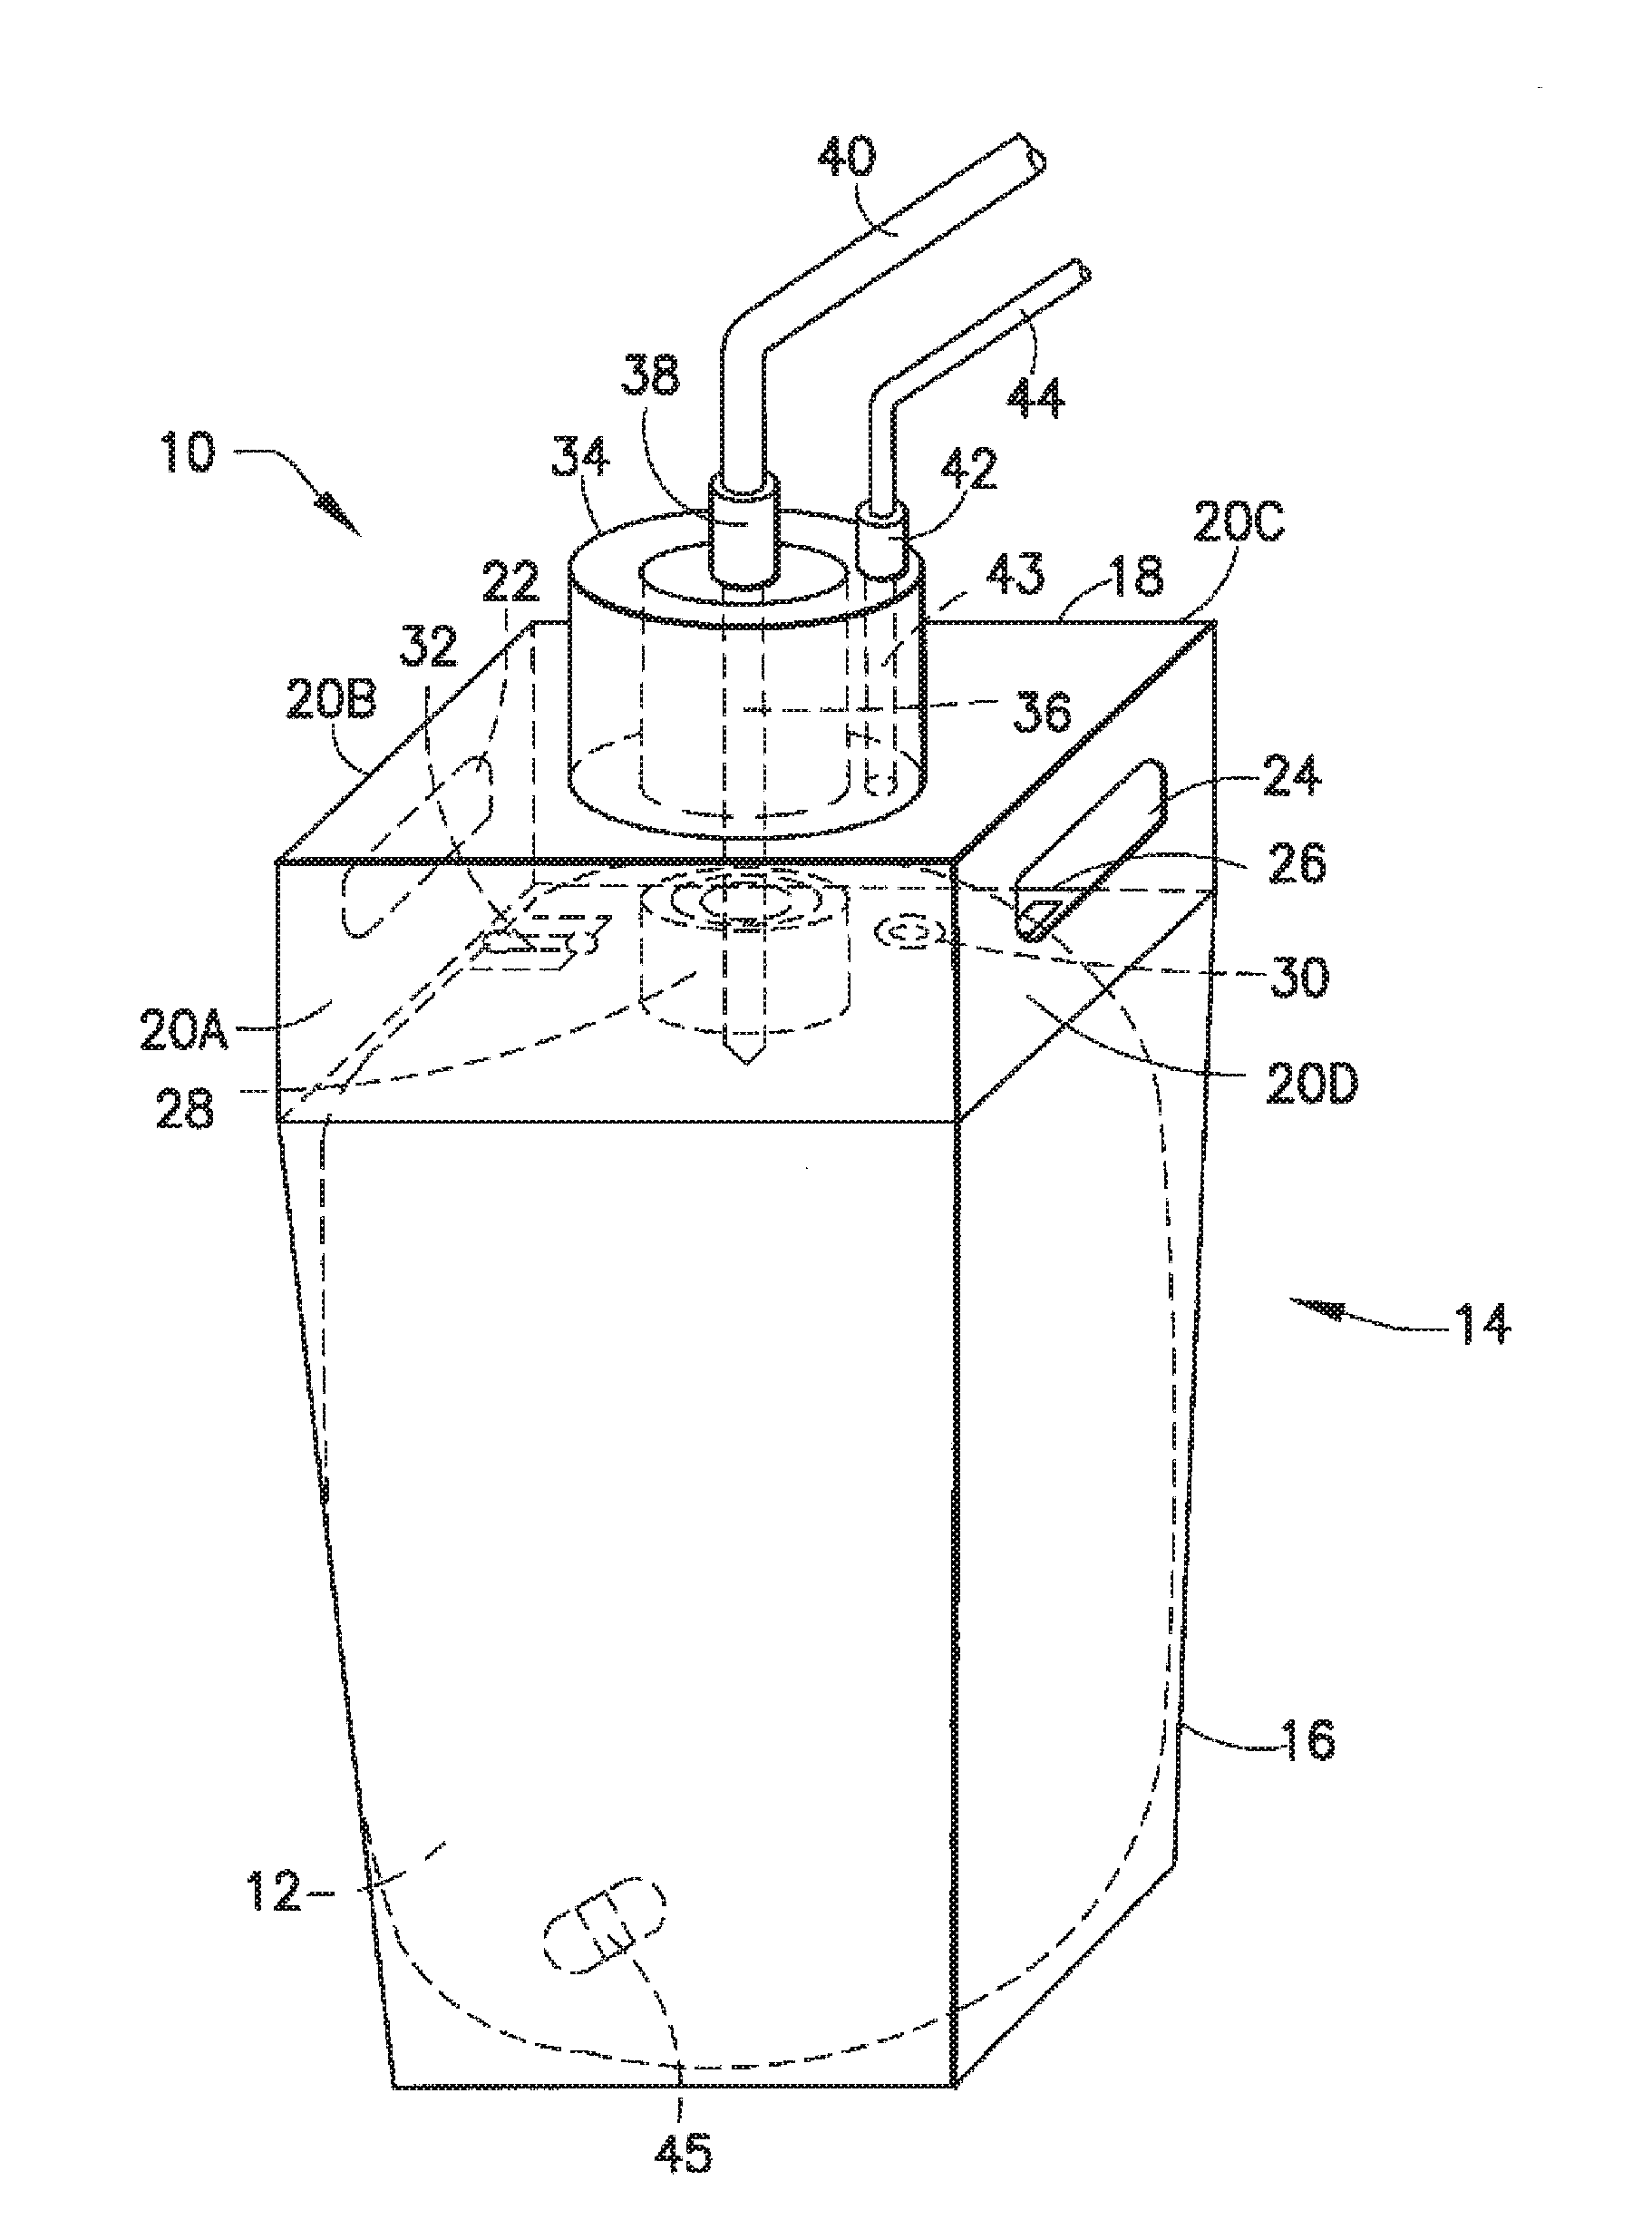 Barrier fluoropolymer film-based liners and packaging comprising same